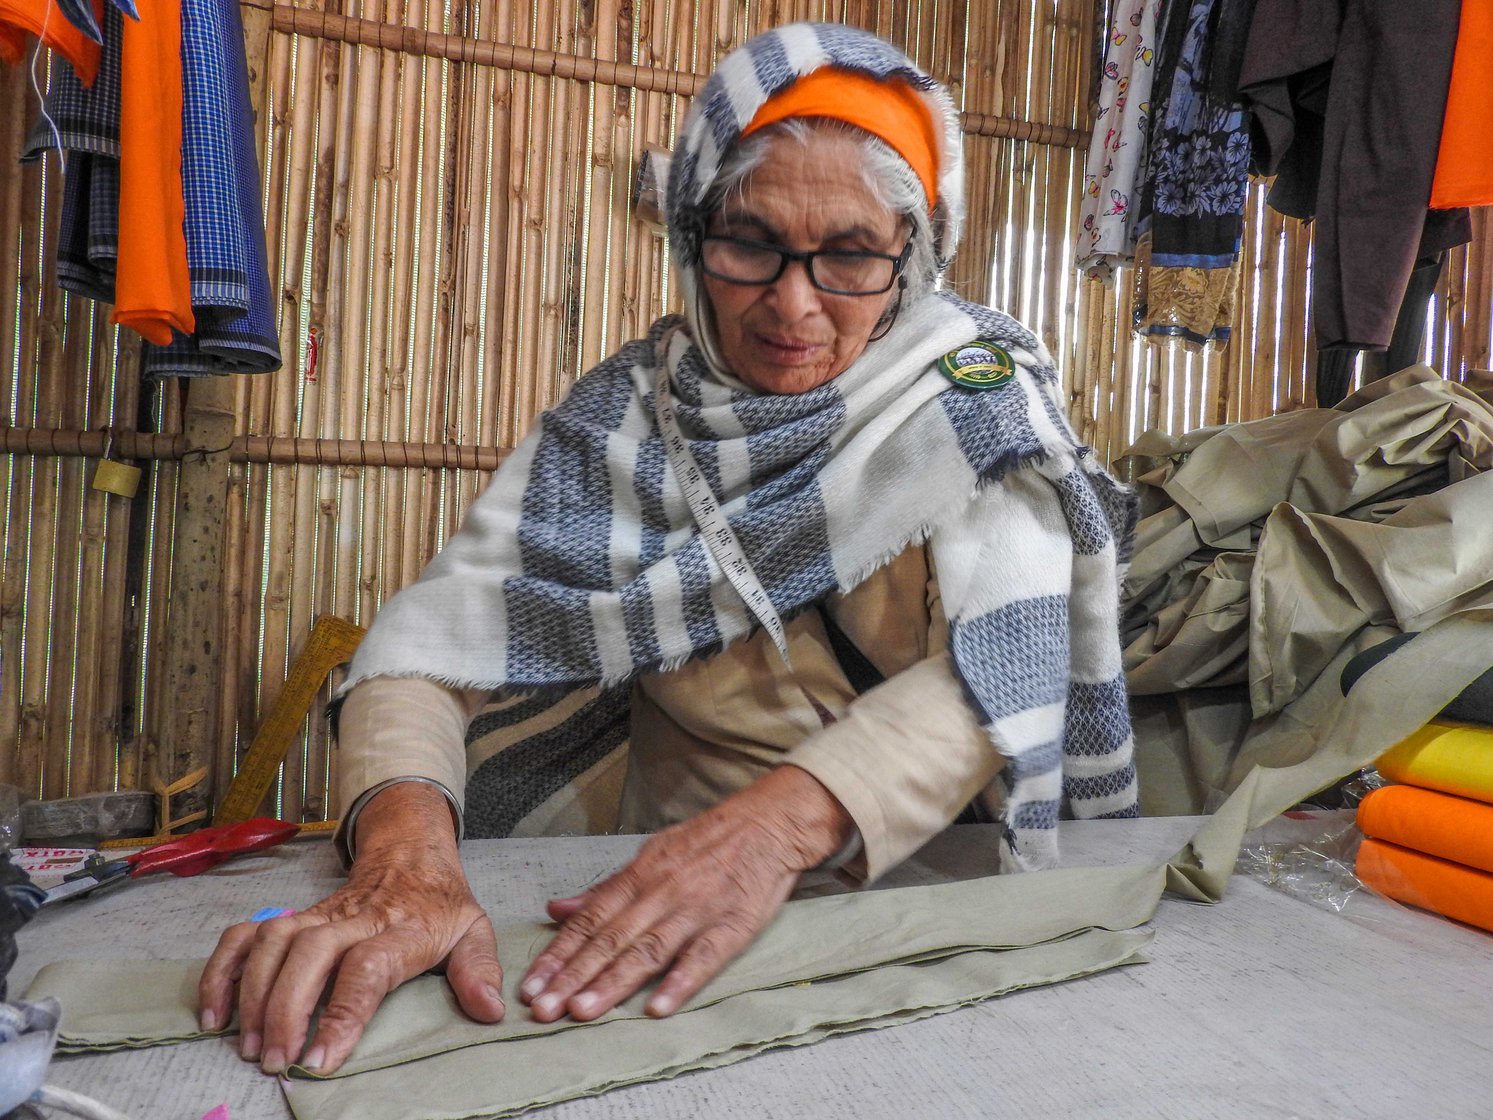 Mohini Kaur came to the Singhu protest site in November 2020 and volunteered to stitch and mend the protesting farmers' clothes. "They grow food for us, this was something I could do for them," she says